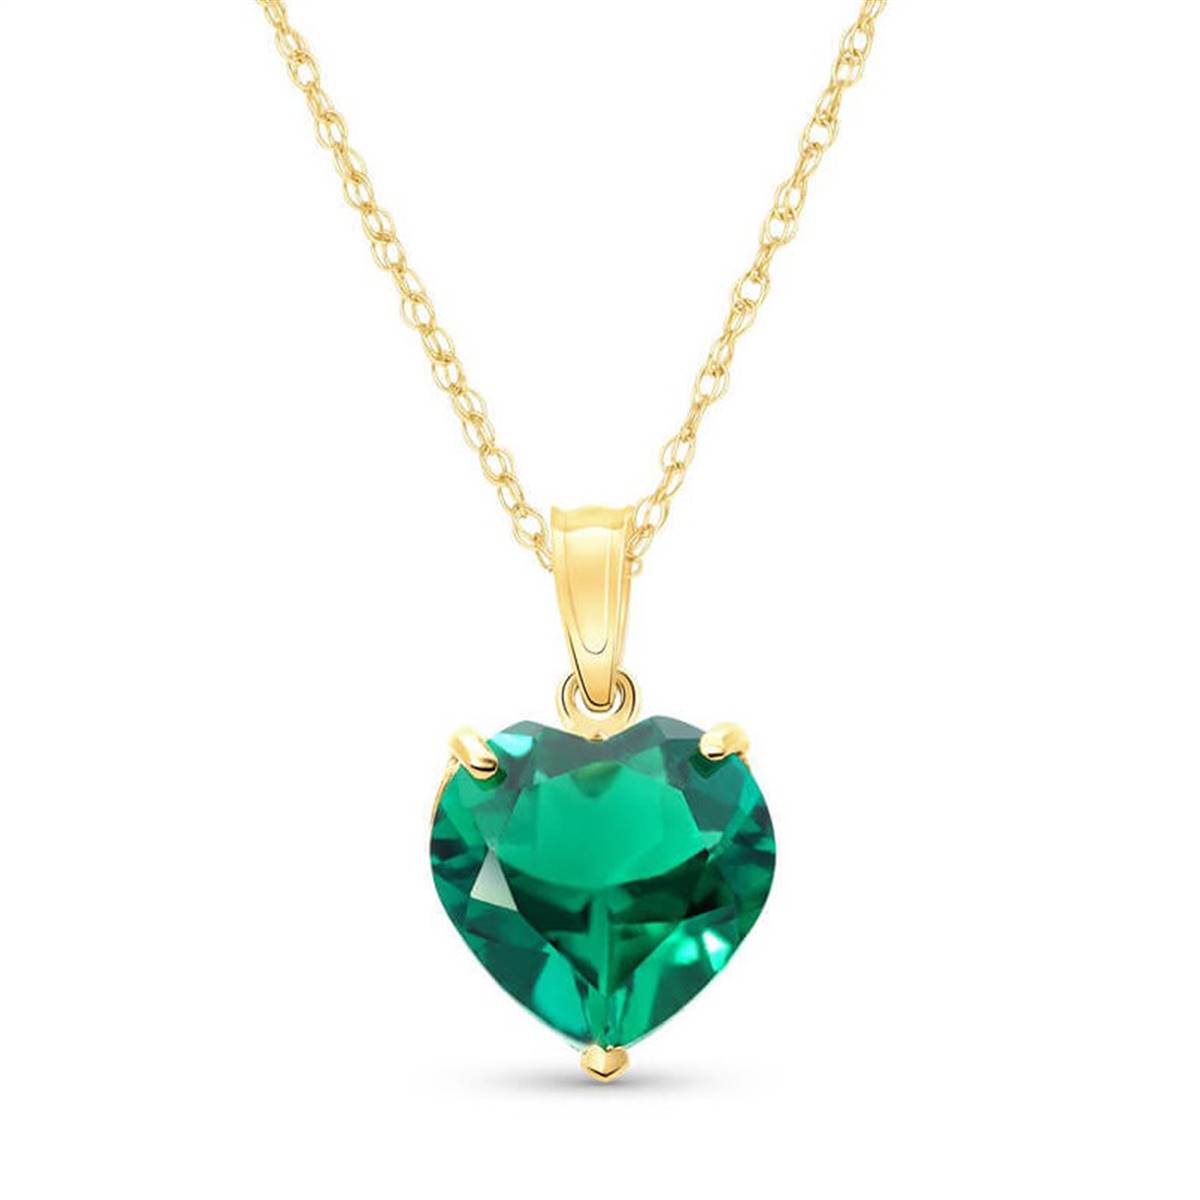 14K Solid Yellow Gold Necklace With Heart Shape 2.75 ctw High Polished Genuine Emerald - Grade AAA